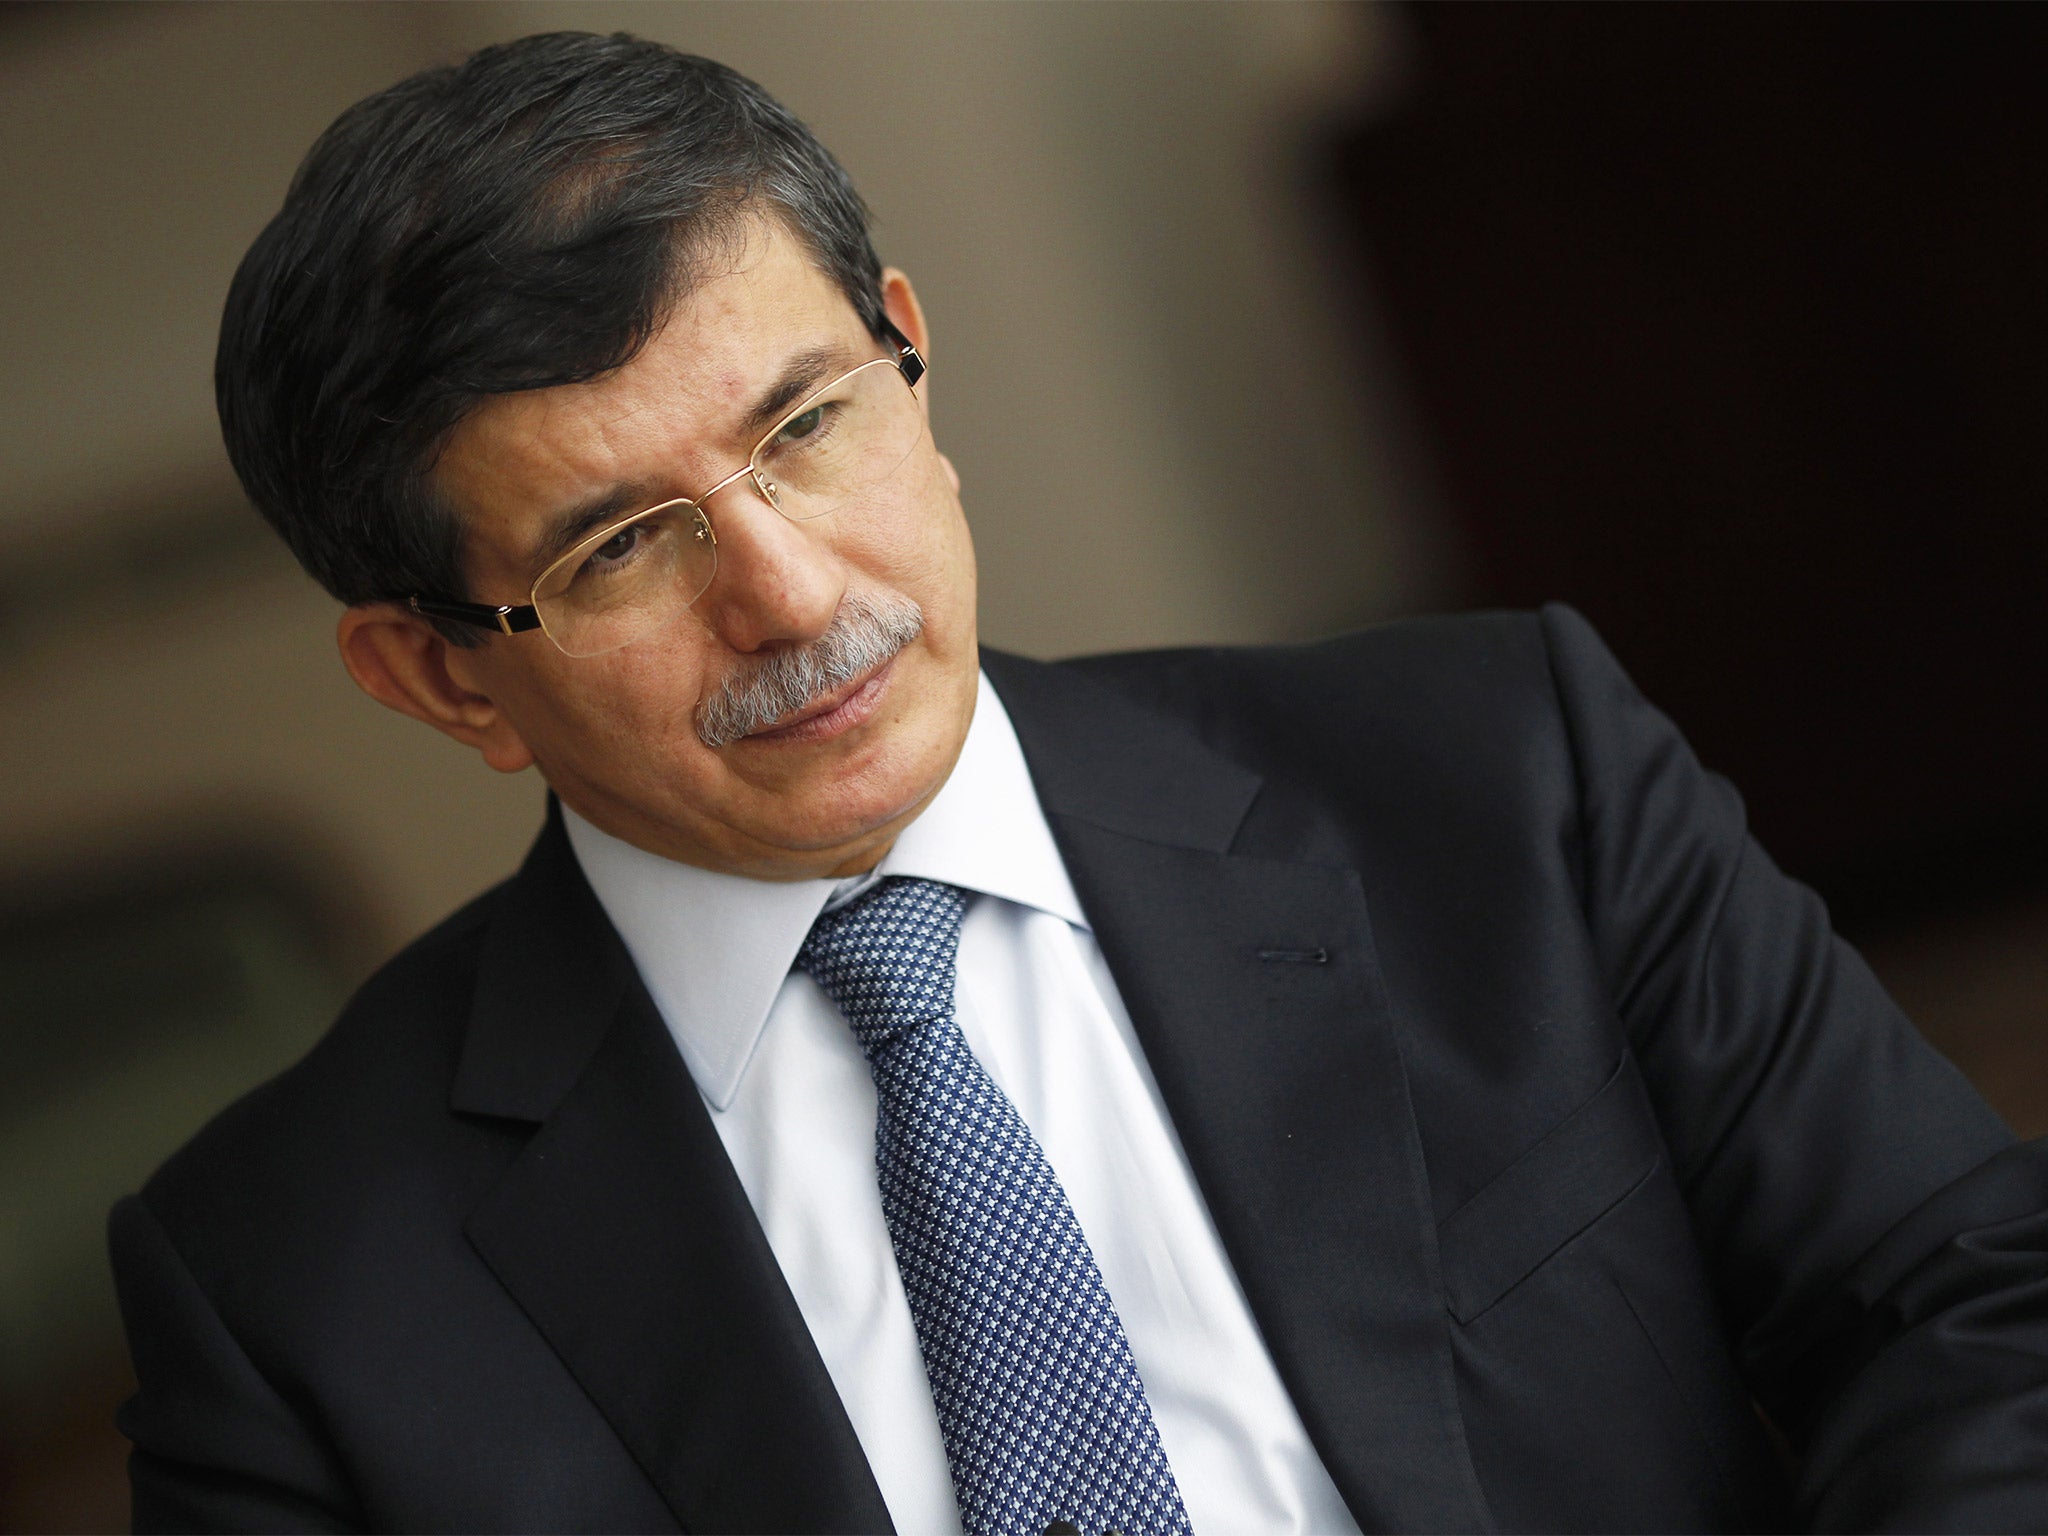 Ahmet Davutoglu is irritated at the way Turkey’s motives are questioned